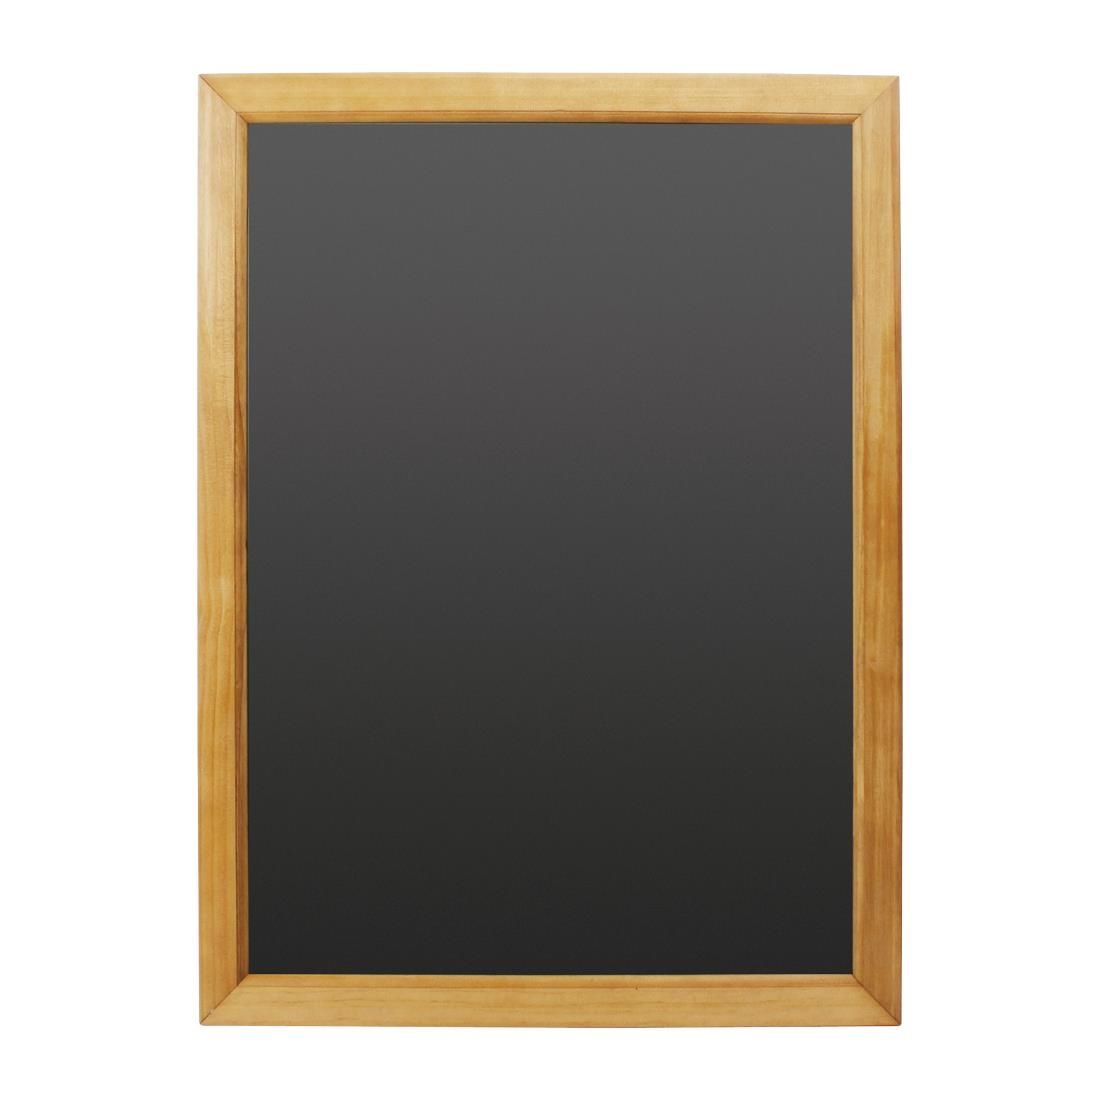 GG107 Olympia Wall Mounted Chalkboard 600 x 800mm JD Catering Equipment Solutions Ltd